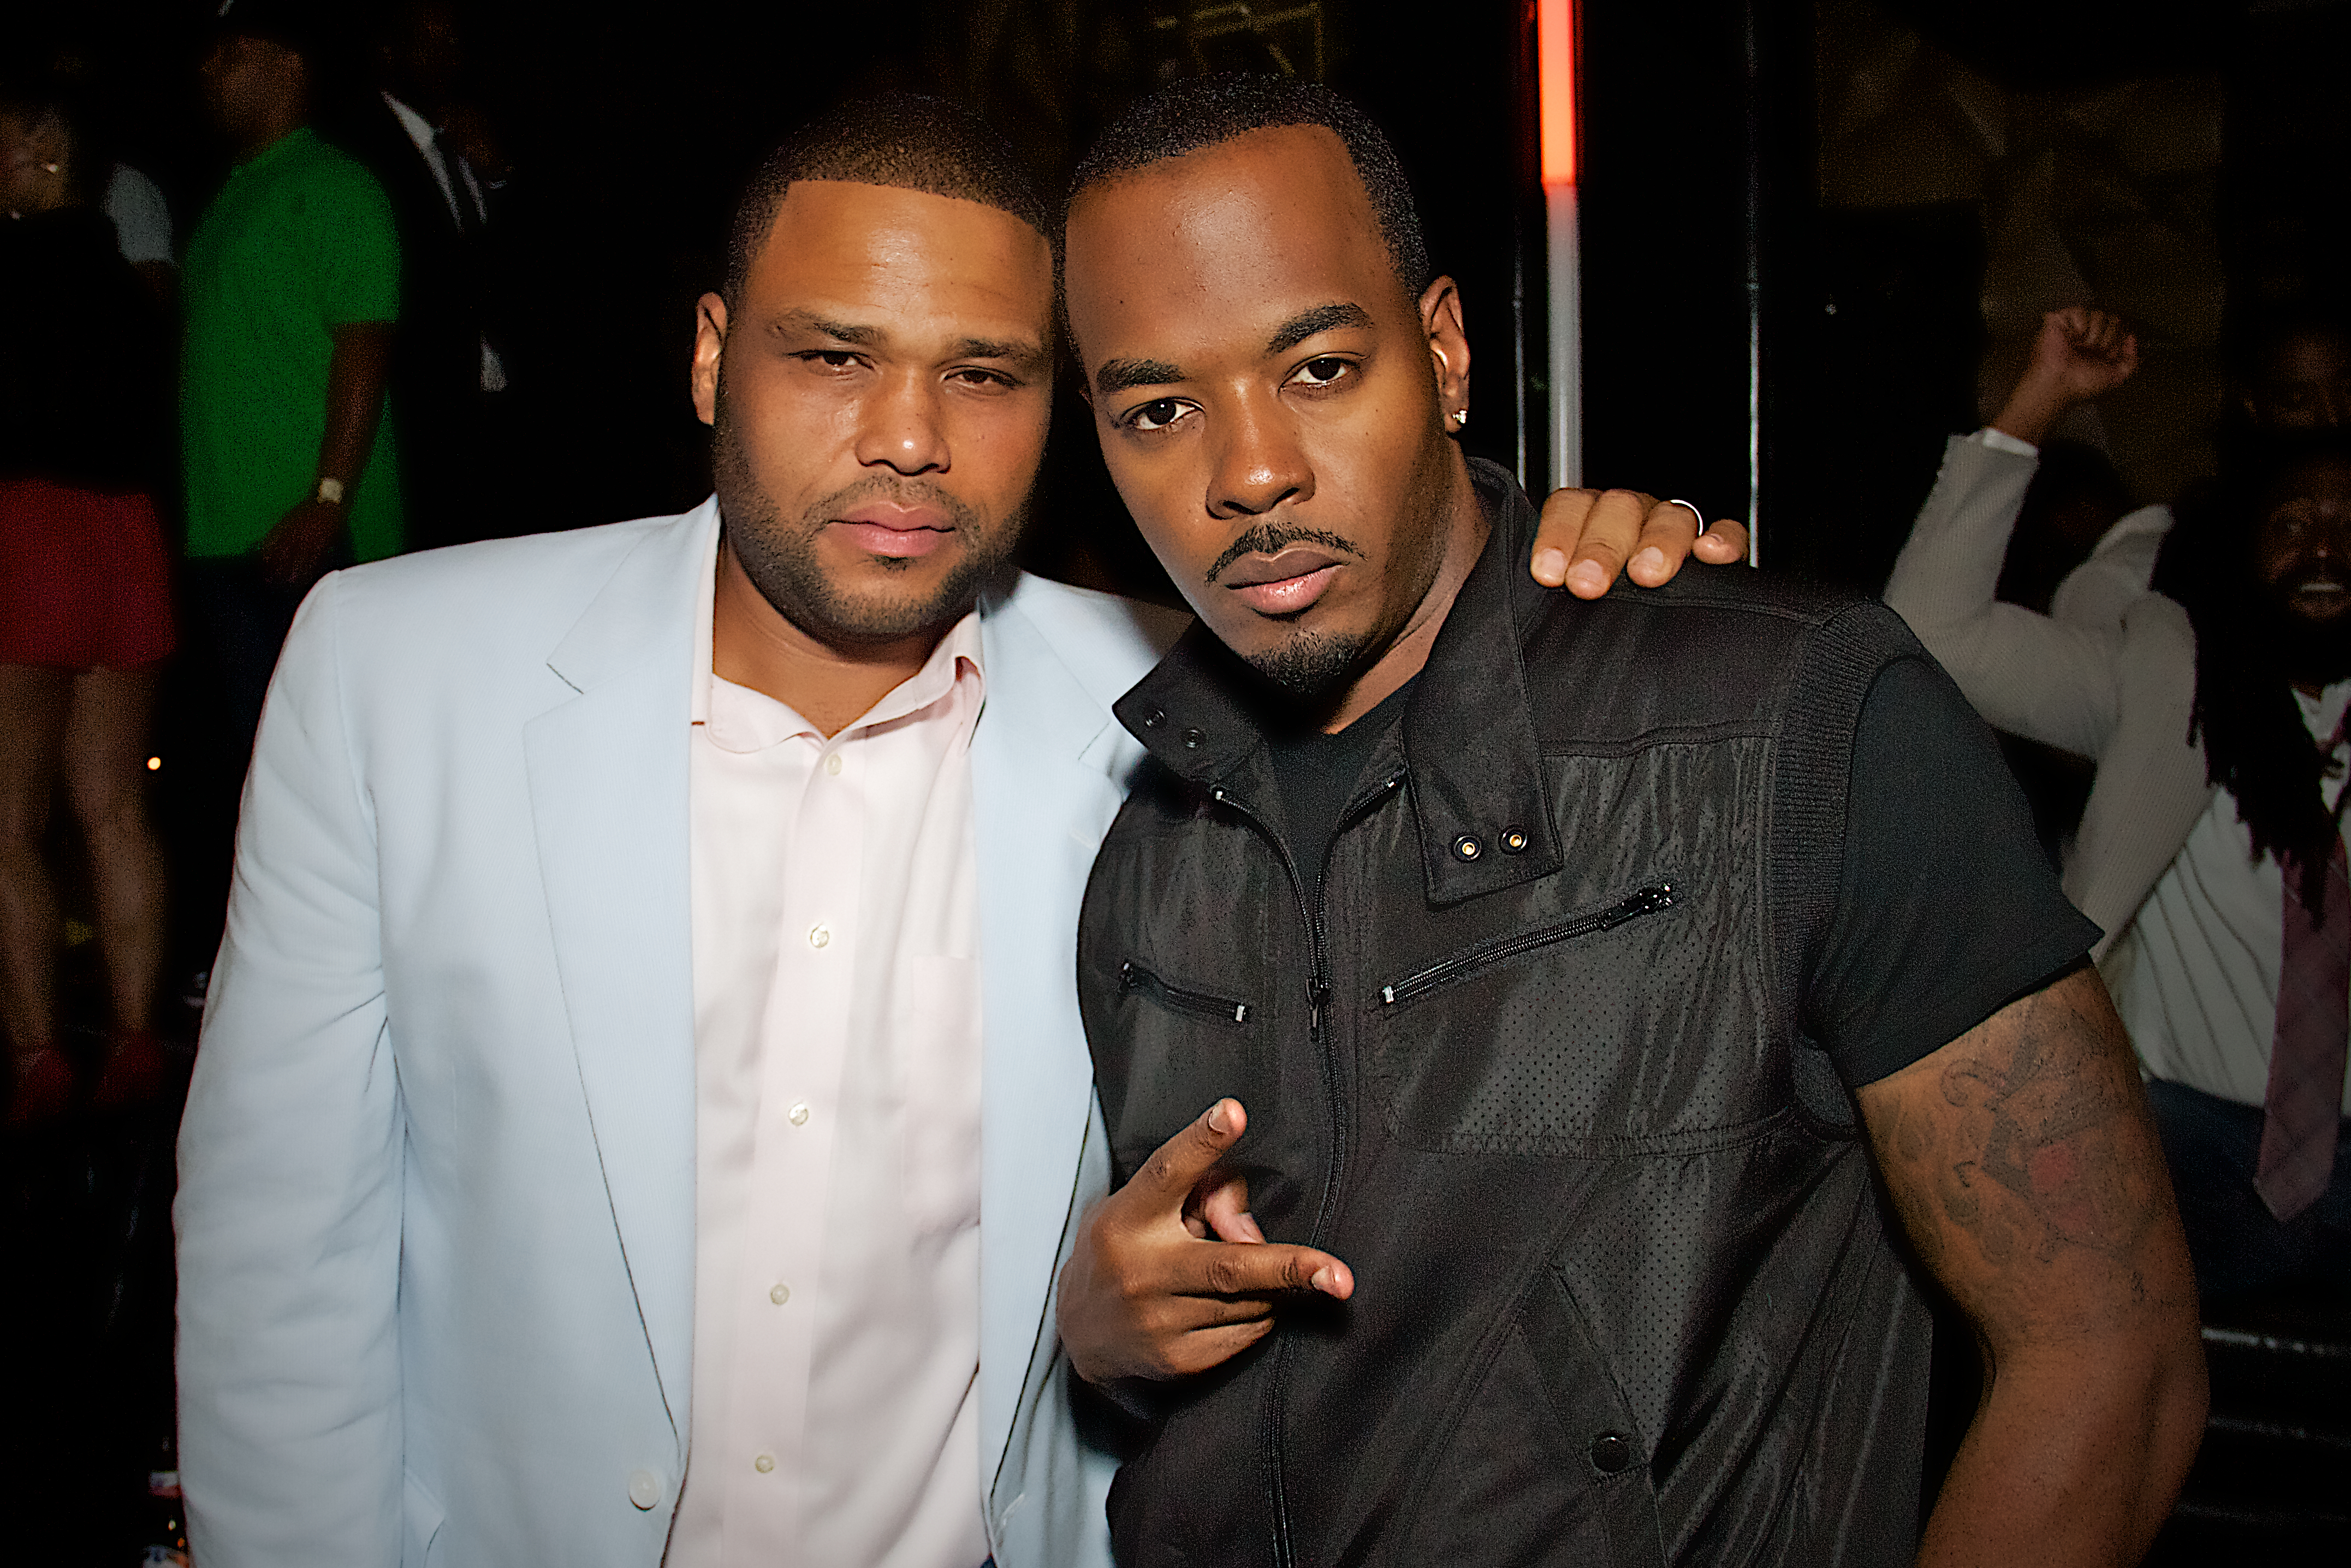 Marques T. Owens and Actor, Anthony Anderson at his birthday event